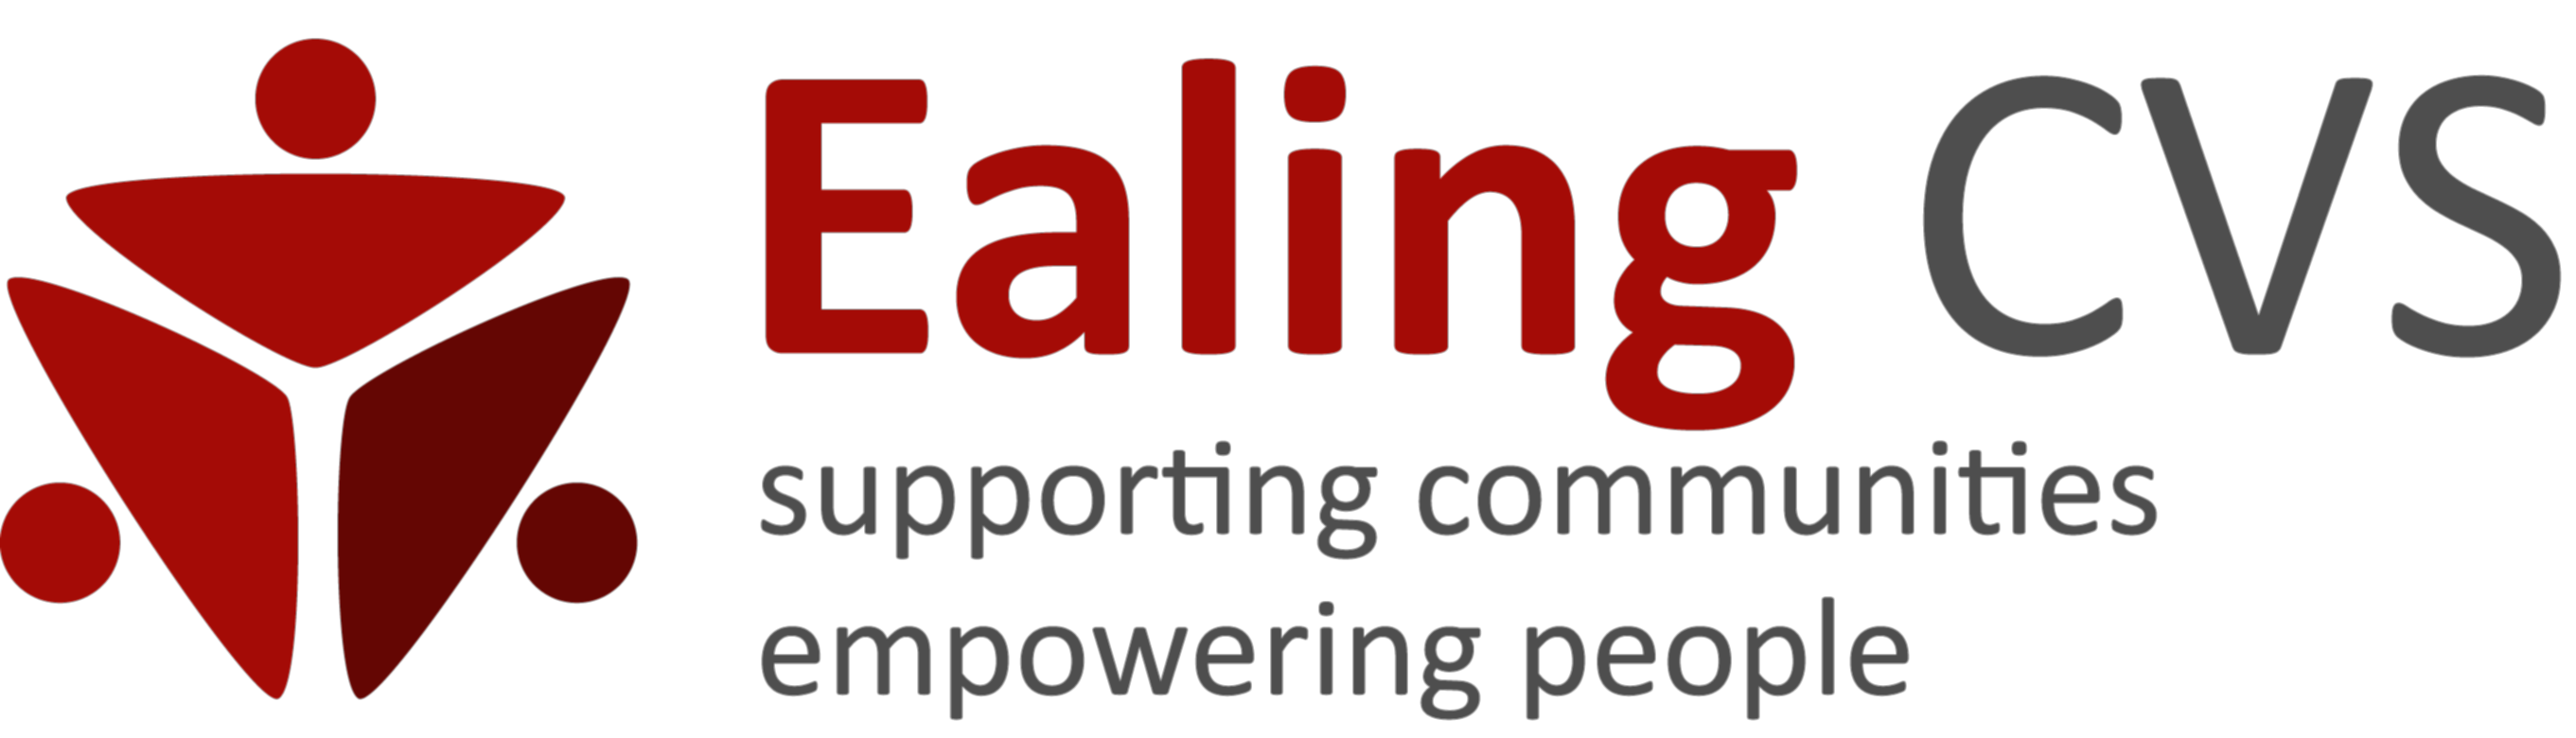 logo for Ealing and Hounslow Community Voluntary Service (ECVS)